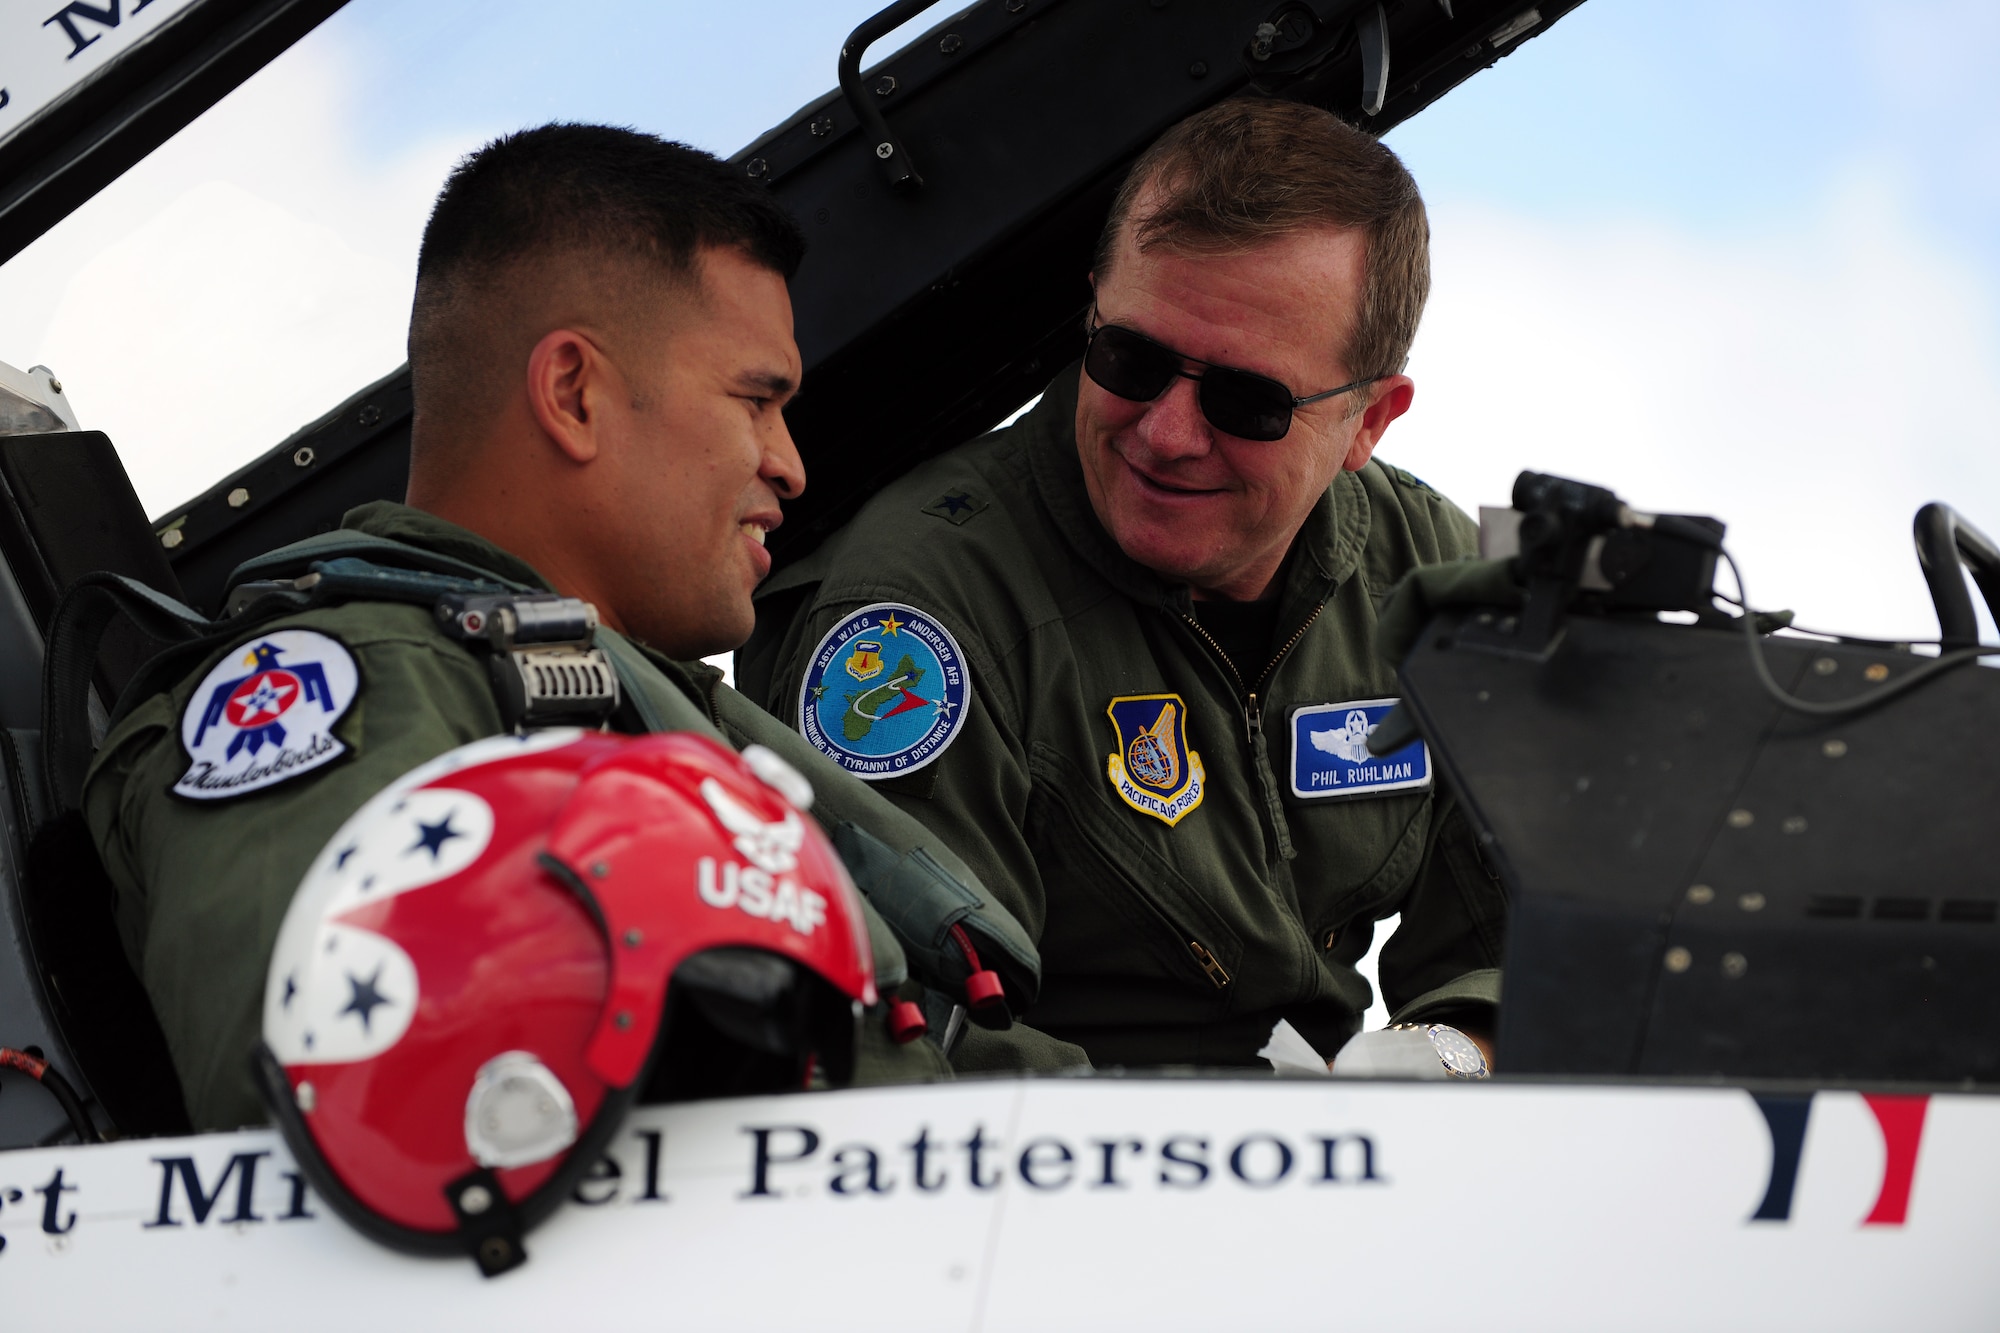 ANDERSEN AIR FORCE BASE, Guam -  Brig. Gen. Phil Ruhlman, 36th Wing commander, thanks Army Sgt. Dan Elliott here Oct. 6 for his service in the Guam Army National Guard and for his heroism during his deployment in Afghanistan May 2008. The Thunderbirds flew Sgt. Elliott in the back seat of an F-16 Falcon over Andersen AFB and the island of Guam. The Thunderbirds are scheduled to perform an airs how over Andersen AFB Oct. 7. (U.S. Air Force photo by Airman 1st Class Courtney Witt)